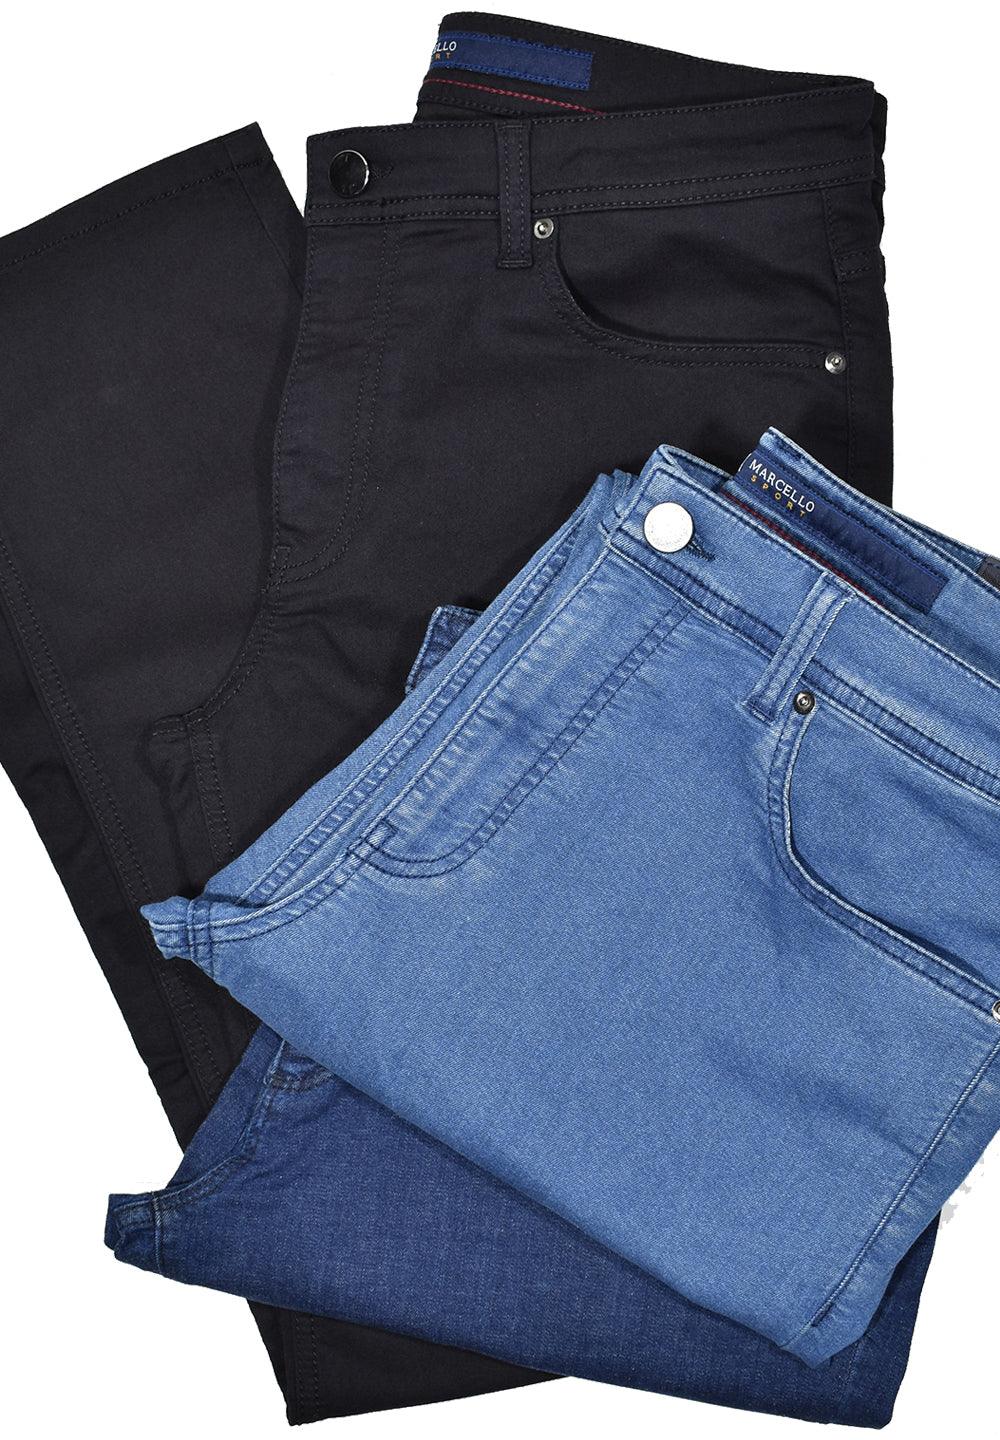 Our lightest 5 pocket jean model feels great on and features stretch fabric to work with your natural movements. Comfort fit waist and seat, slightly slimming down the leg for a contemporary look. Feels like a light weight pant with the benefits of stretch and in a casual jean model. Cotton and lycra, imported. Colors: Black, Denim, Navy  By Marcello Sport